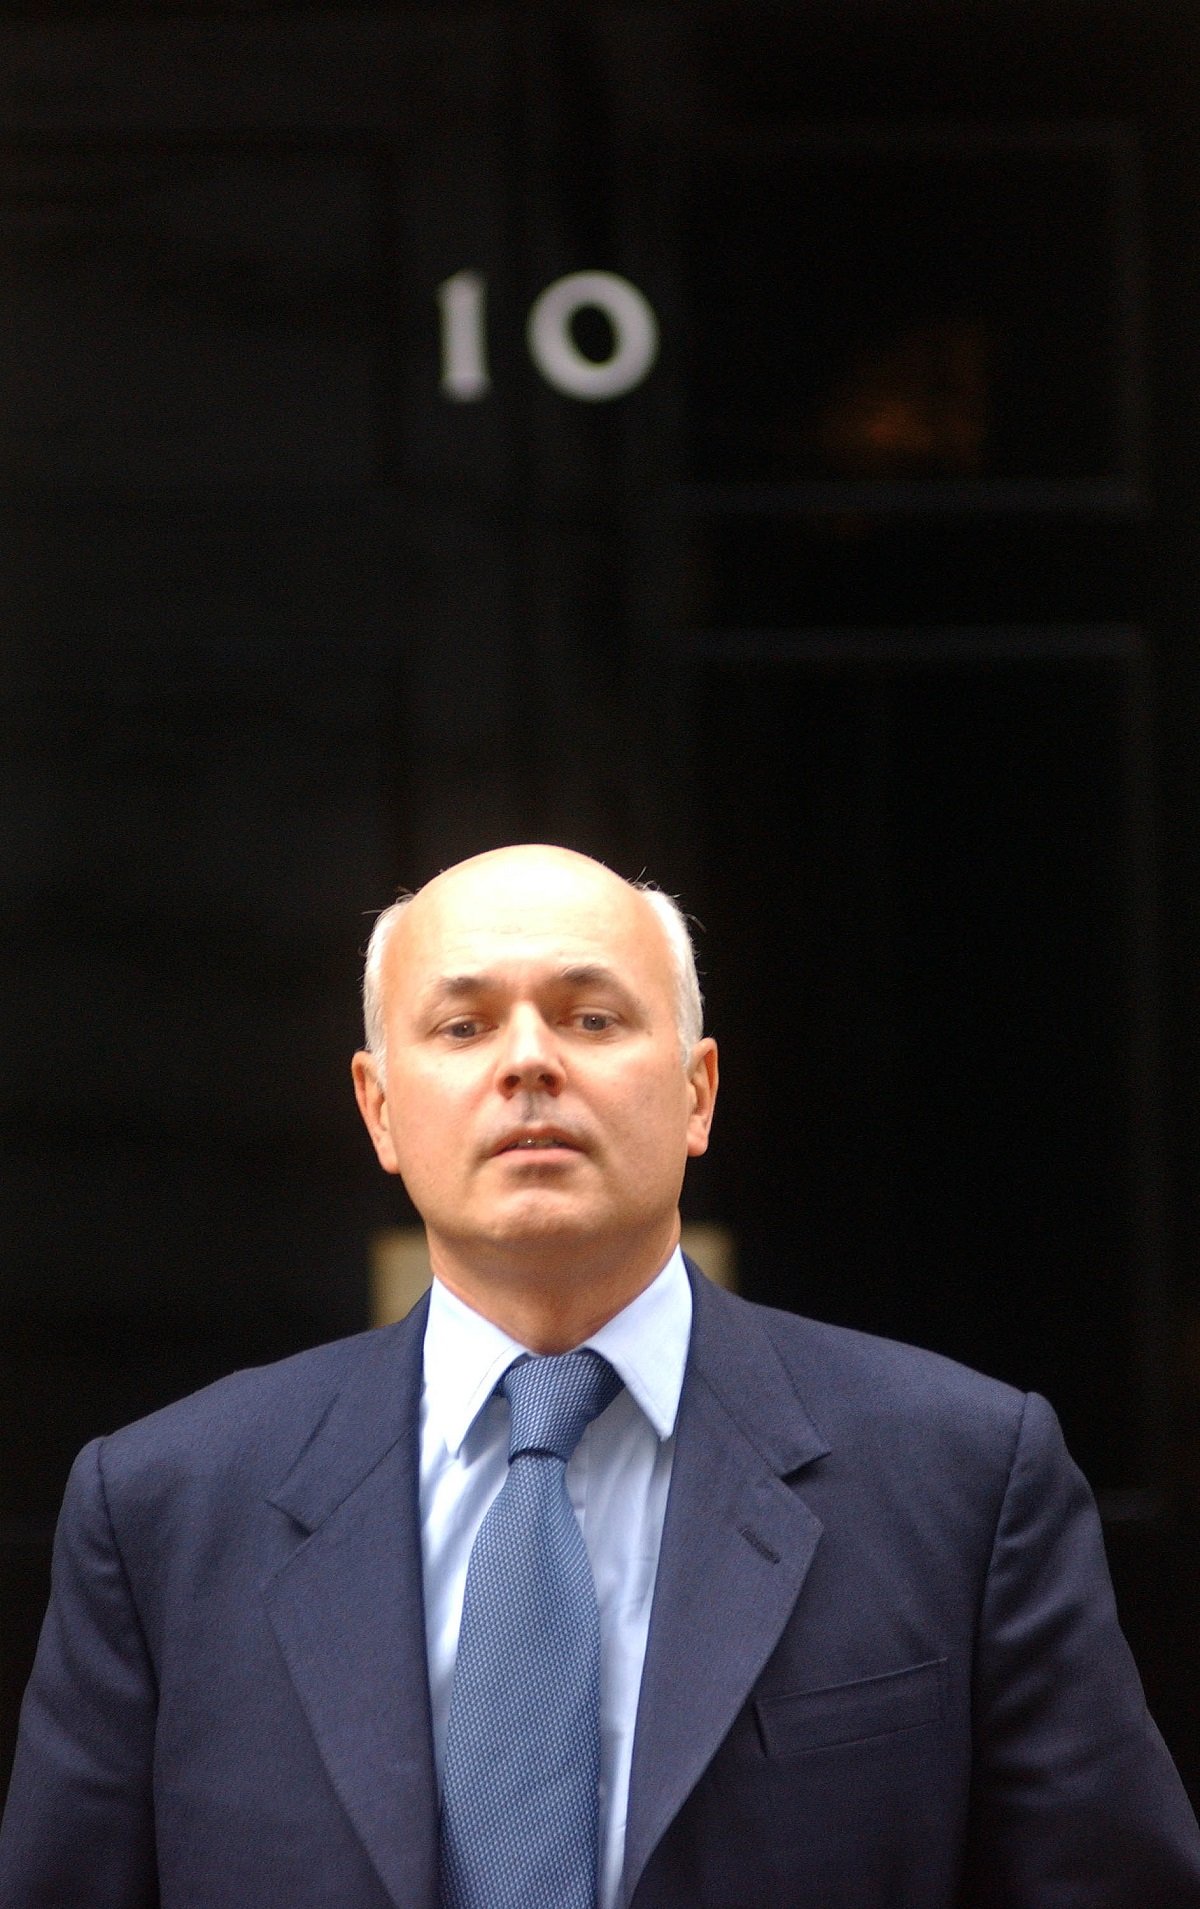 Iain Duncan Smith leaving the British prime minister's home